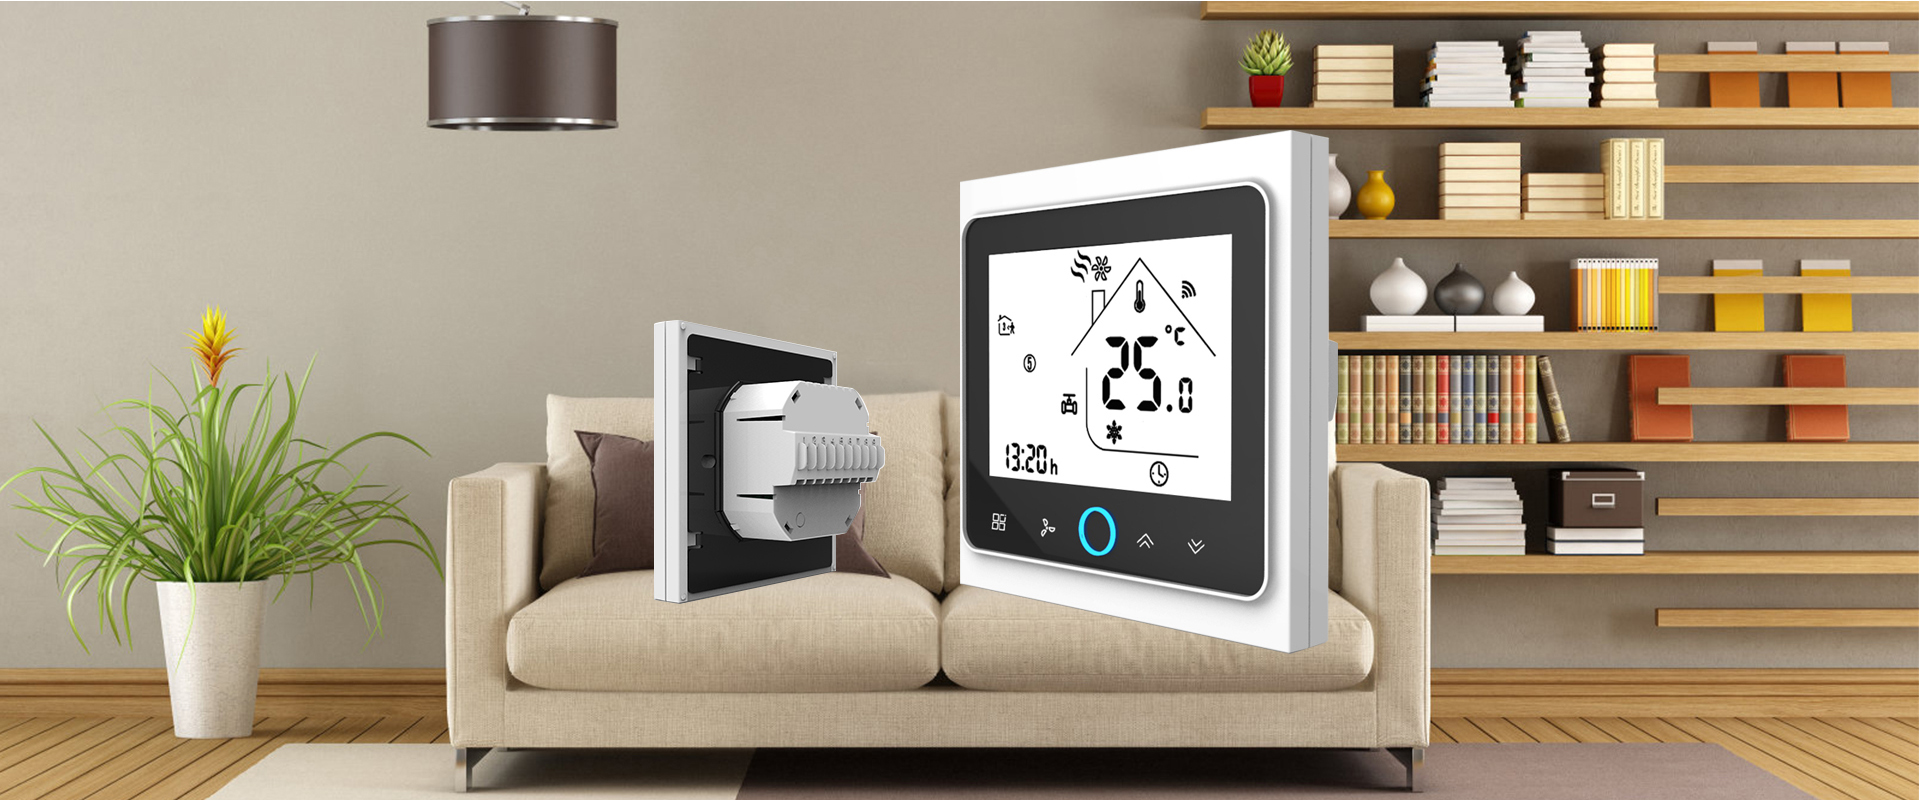 BECA BAC-002 Four Pipe Non Wifi Standalone Fan Coil Programmable Room Thermostat-Xiamen Beca Energysaving Technology